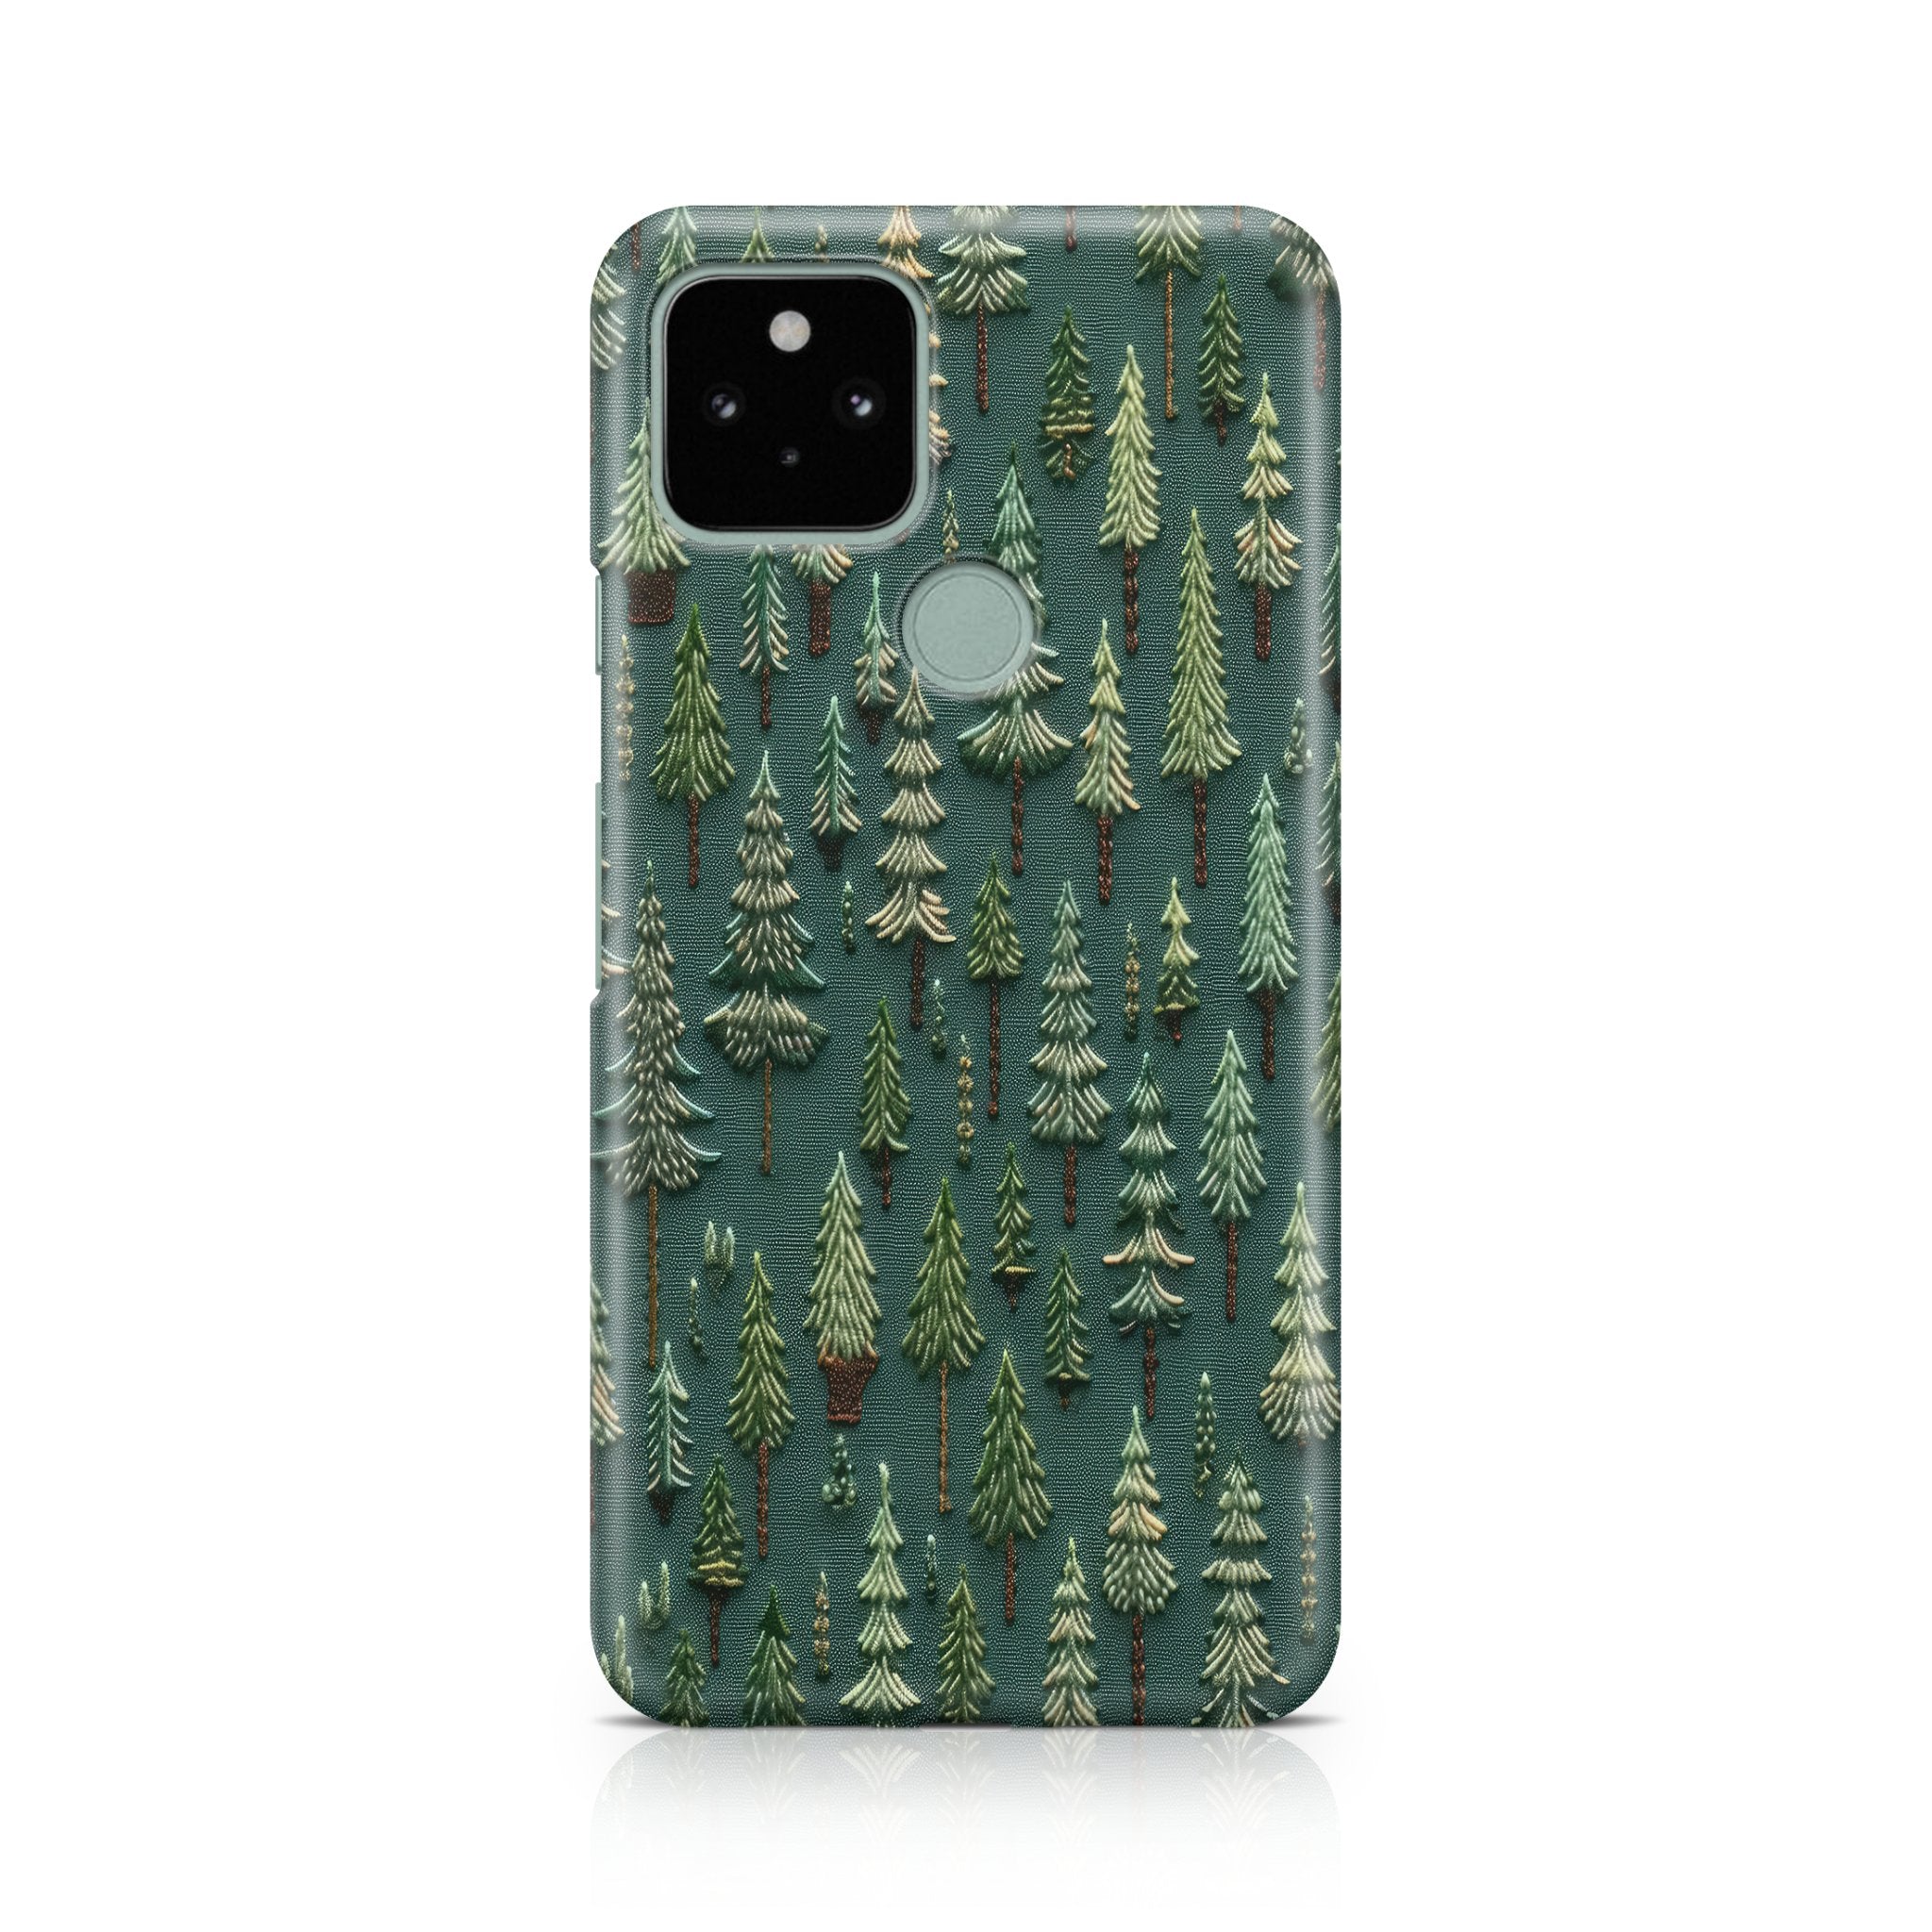 Embroidered Forest - Google phone case designs by CaseSwagger